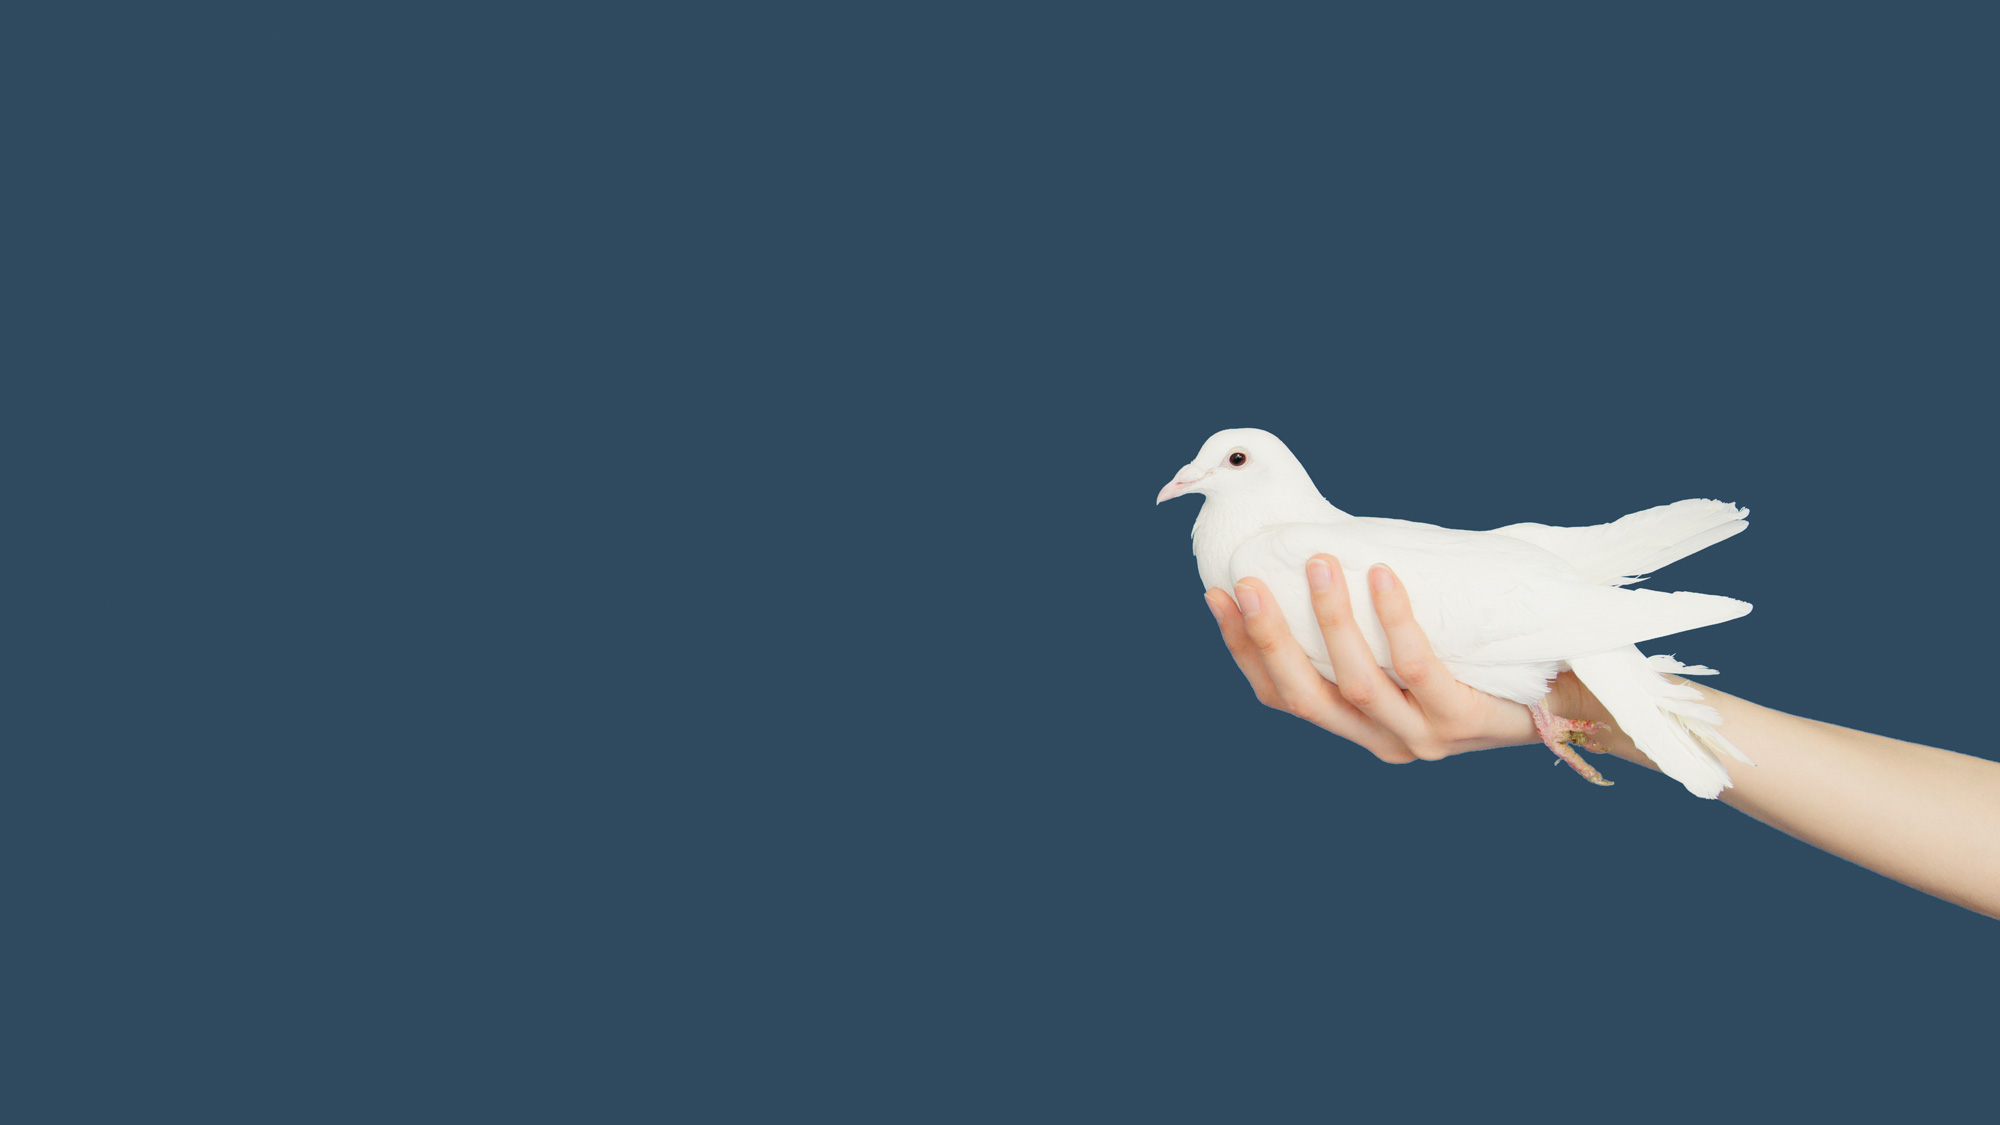 Hand extended holding a dove with a teal background